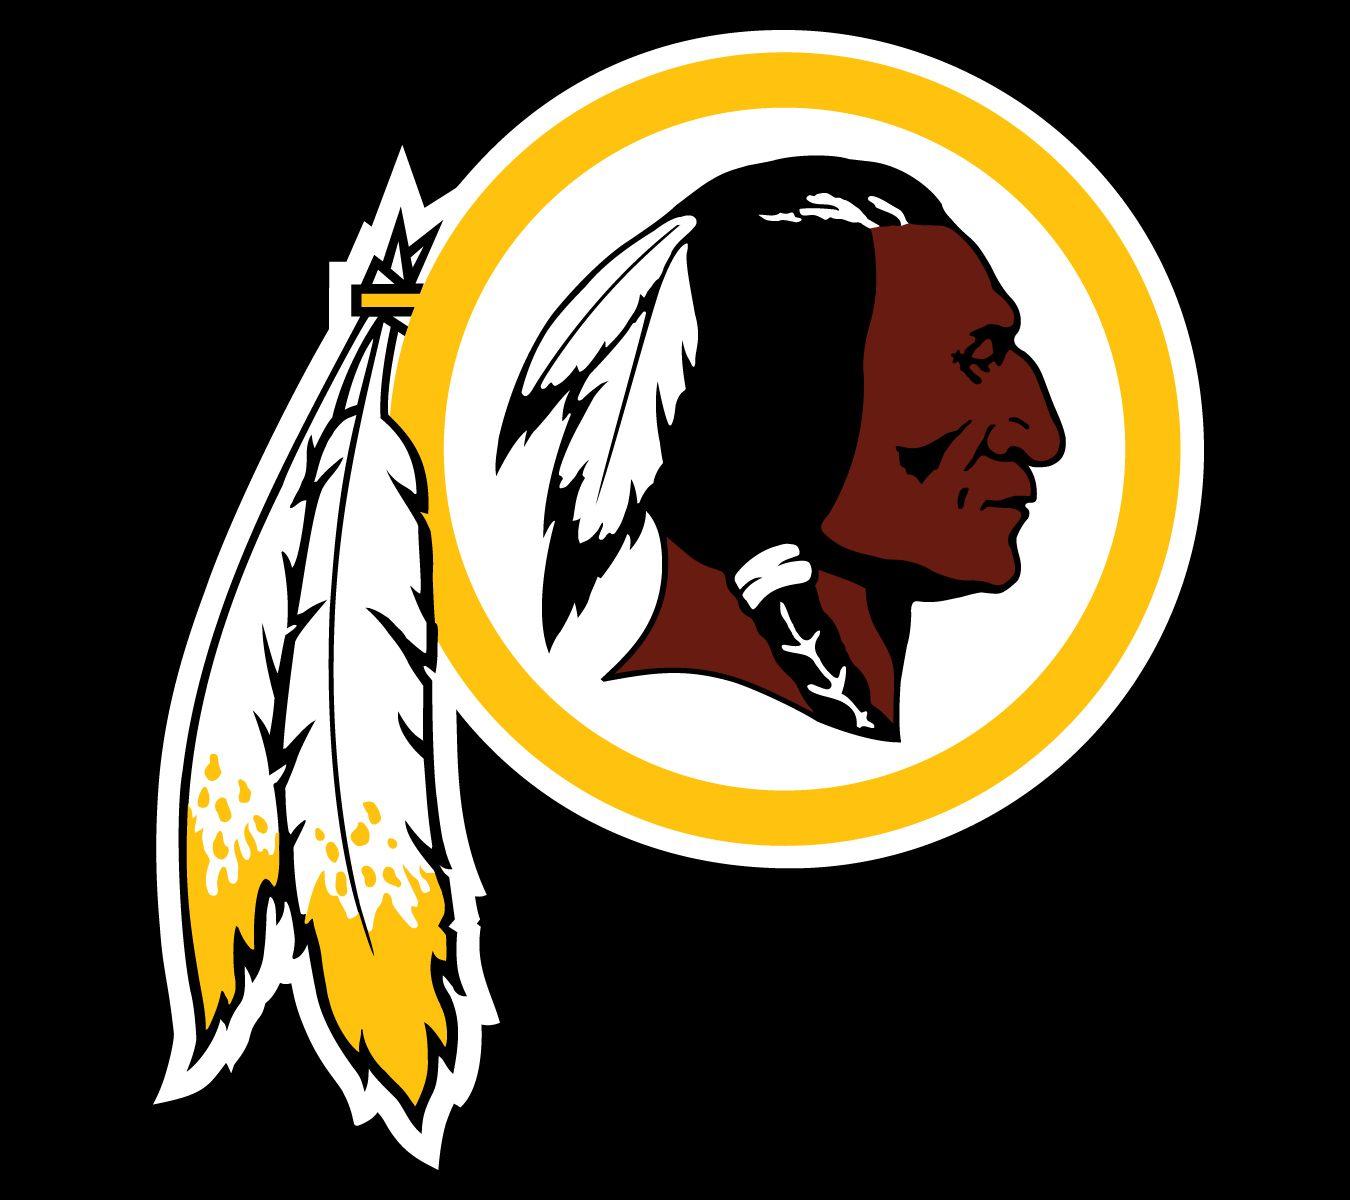 American with Red and Yellow Logo - Washington Redskins Logo, Redskins Symbol, Meaning, History